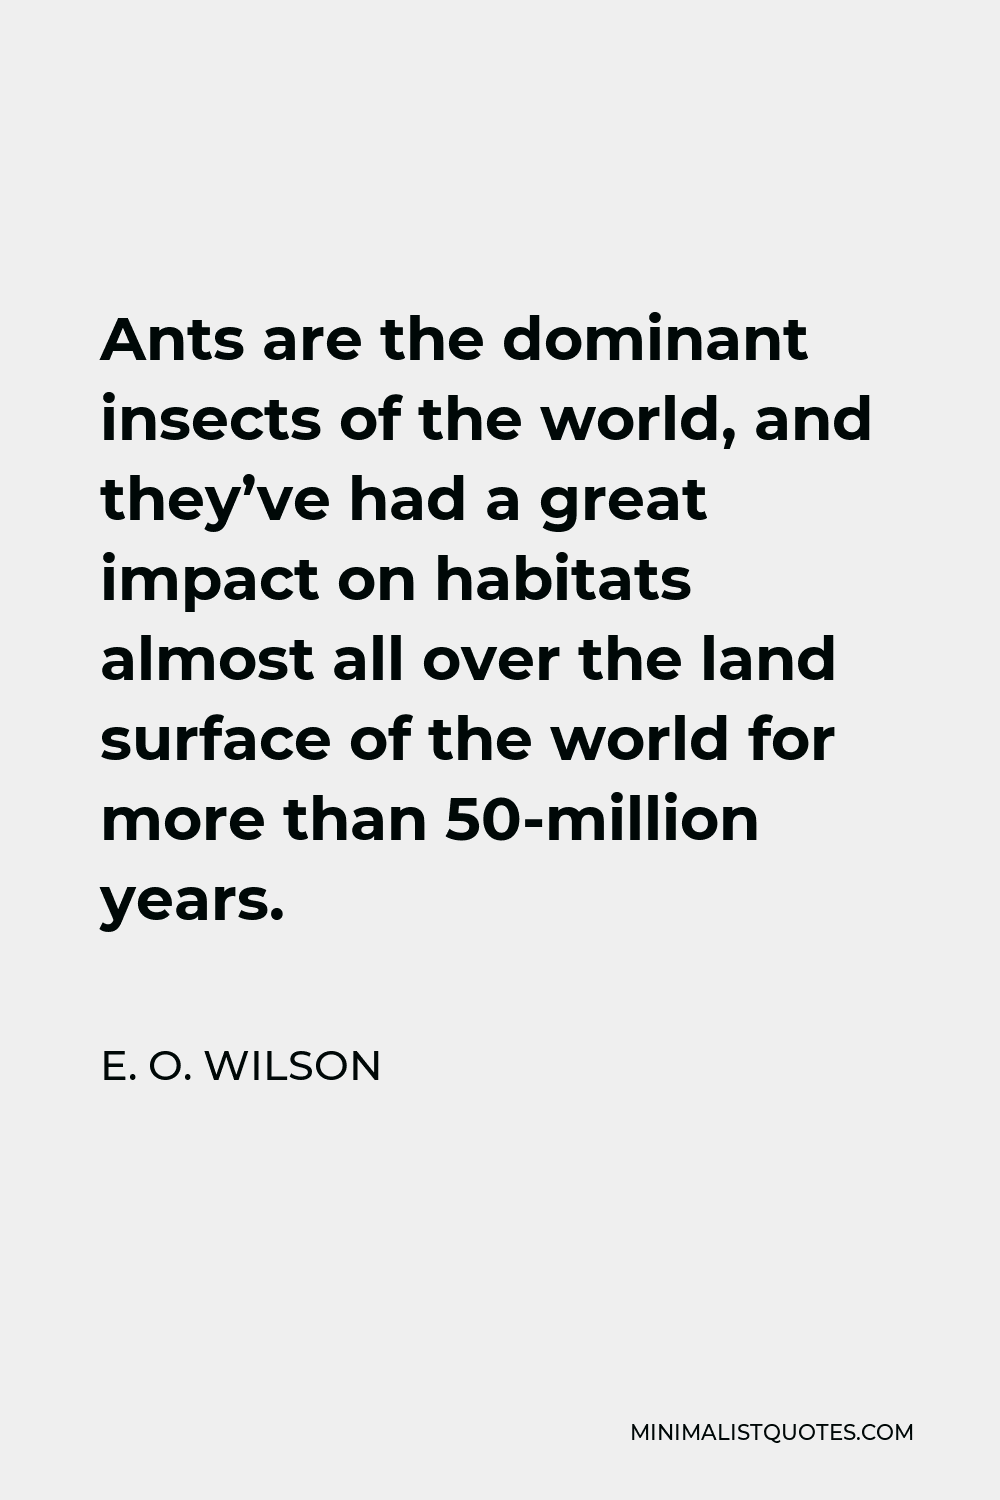 E. O. Wilson Quote - Ants are the dominant insects of the world, and they’ve had a great impact on habitats almost all over the land surface of the world for more than 50-million years.